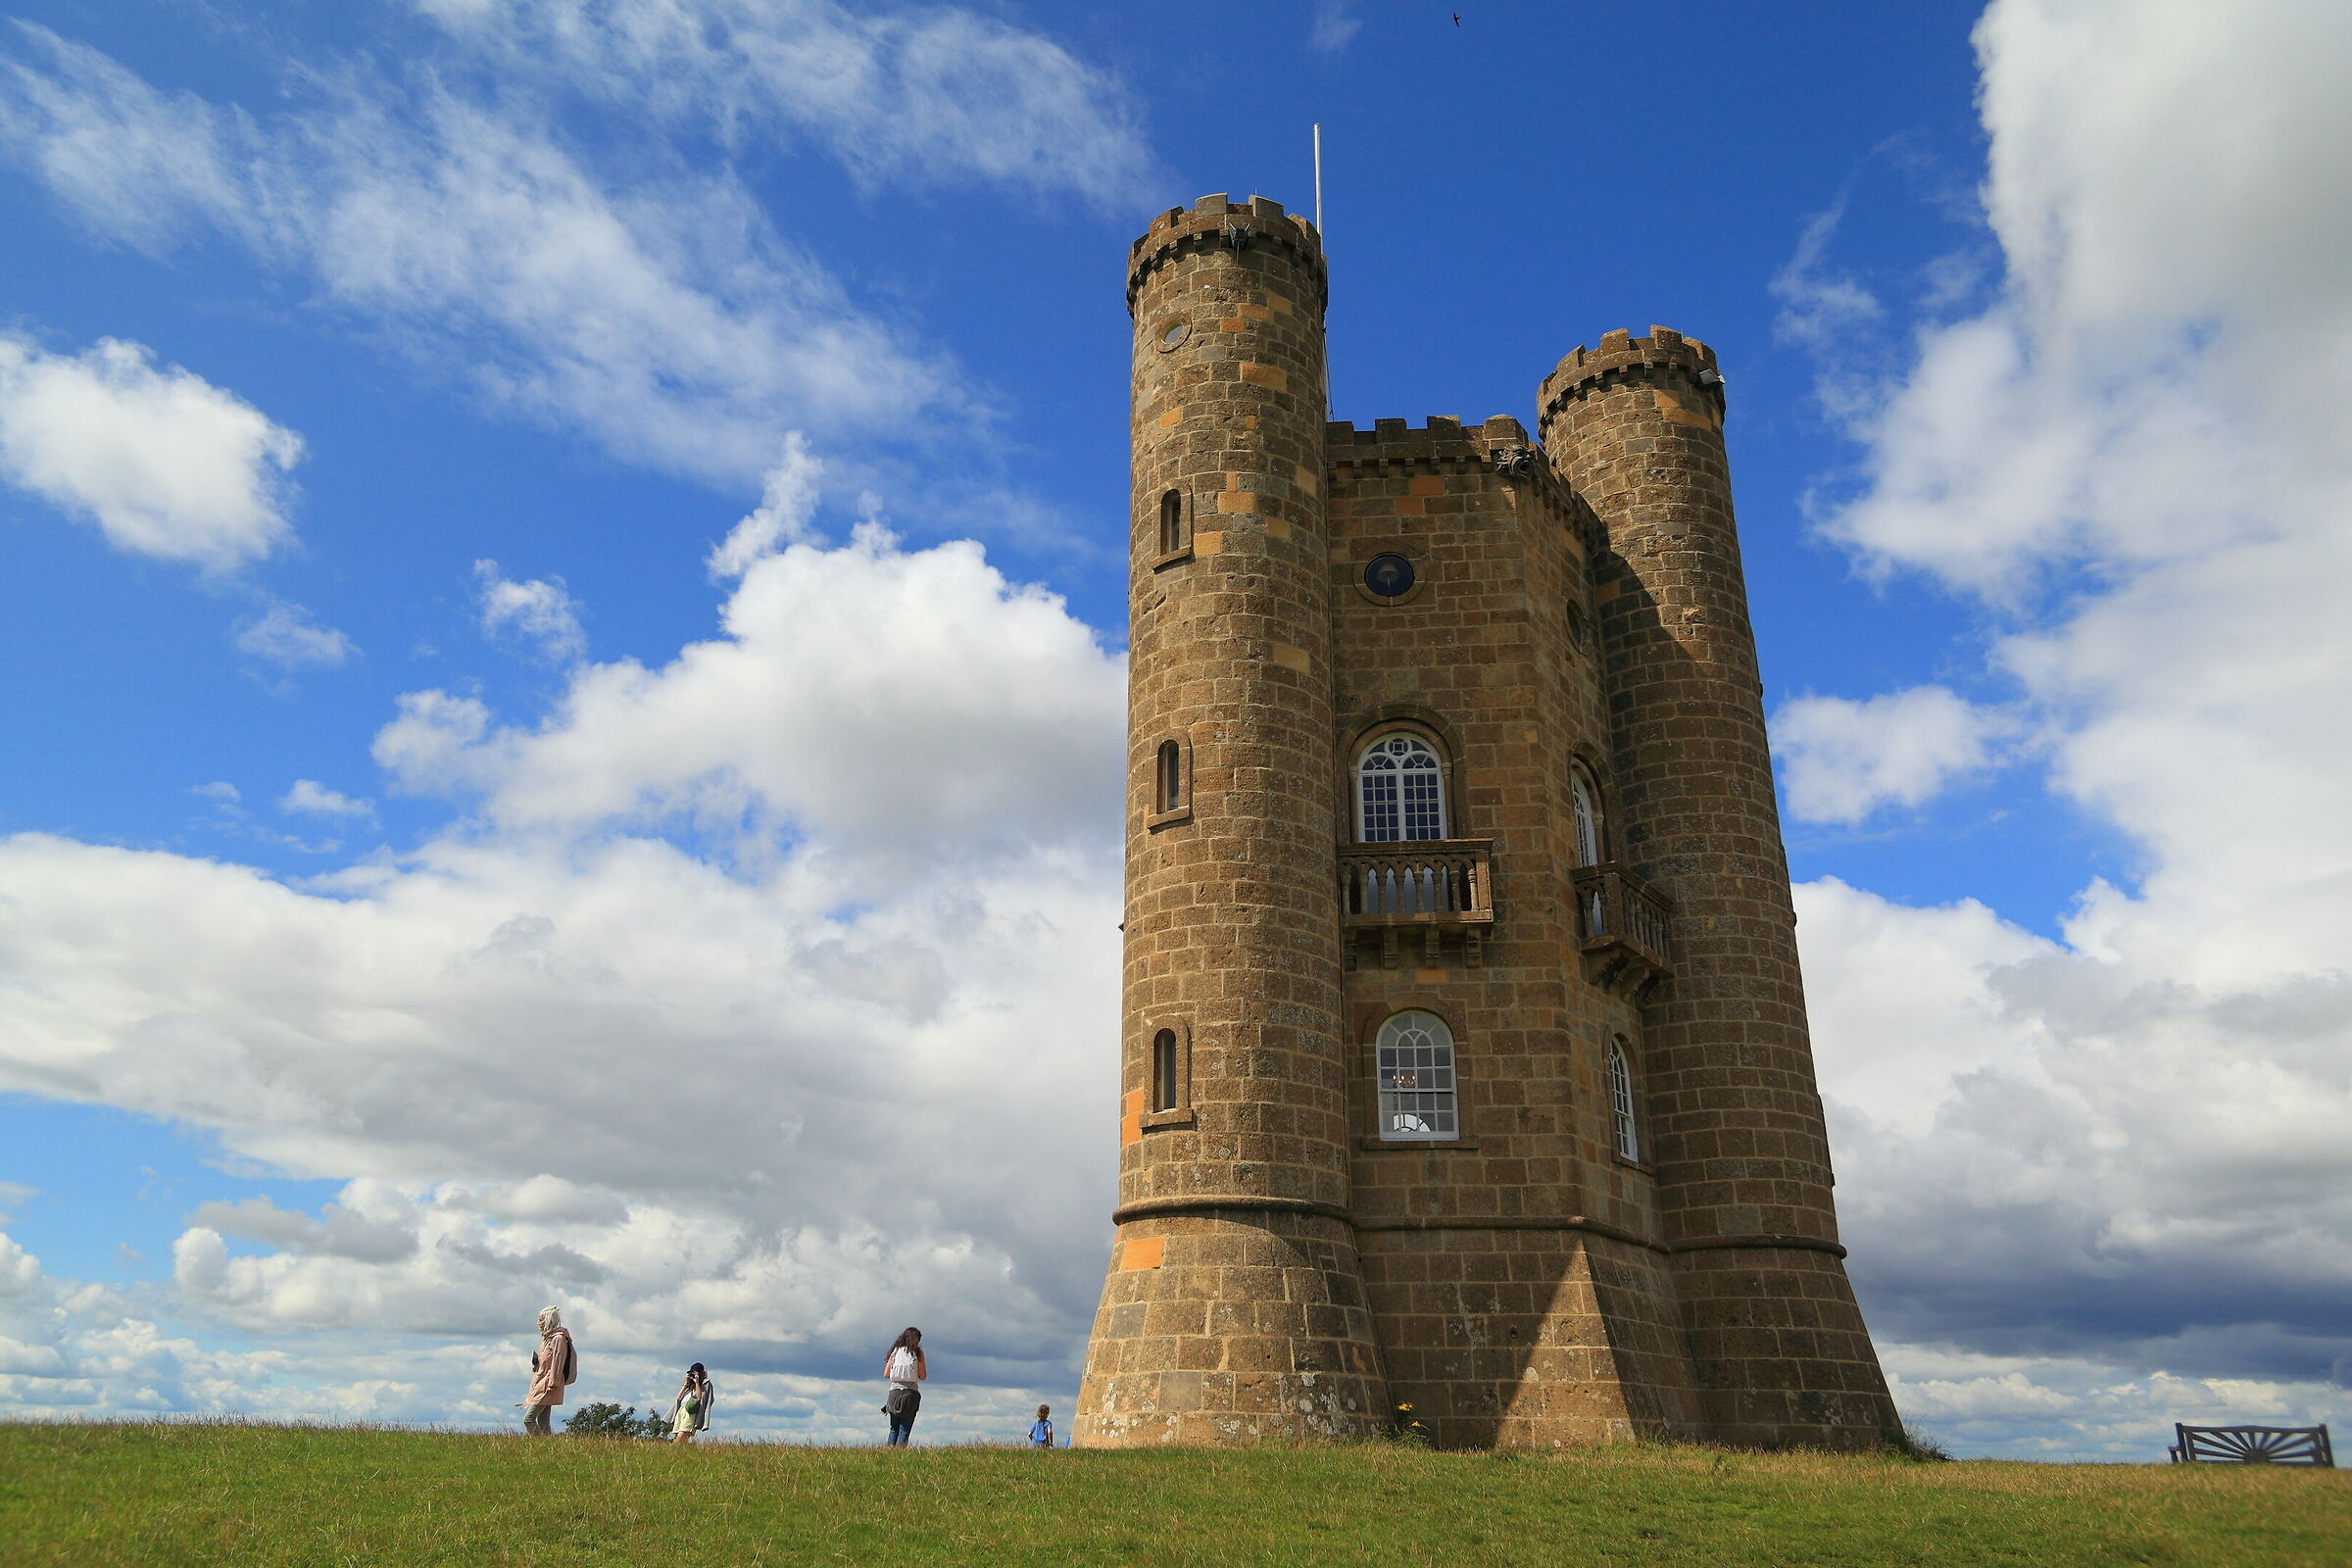 Broadway tower - Cotswolds...